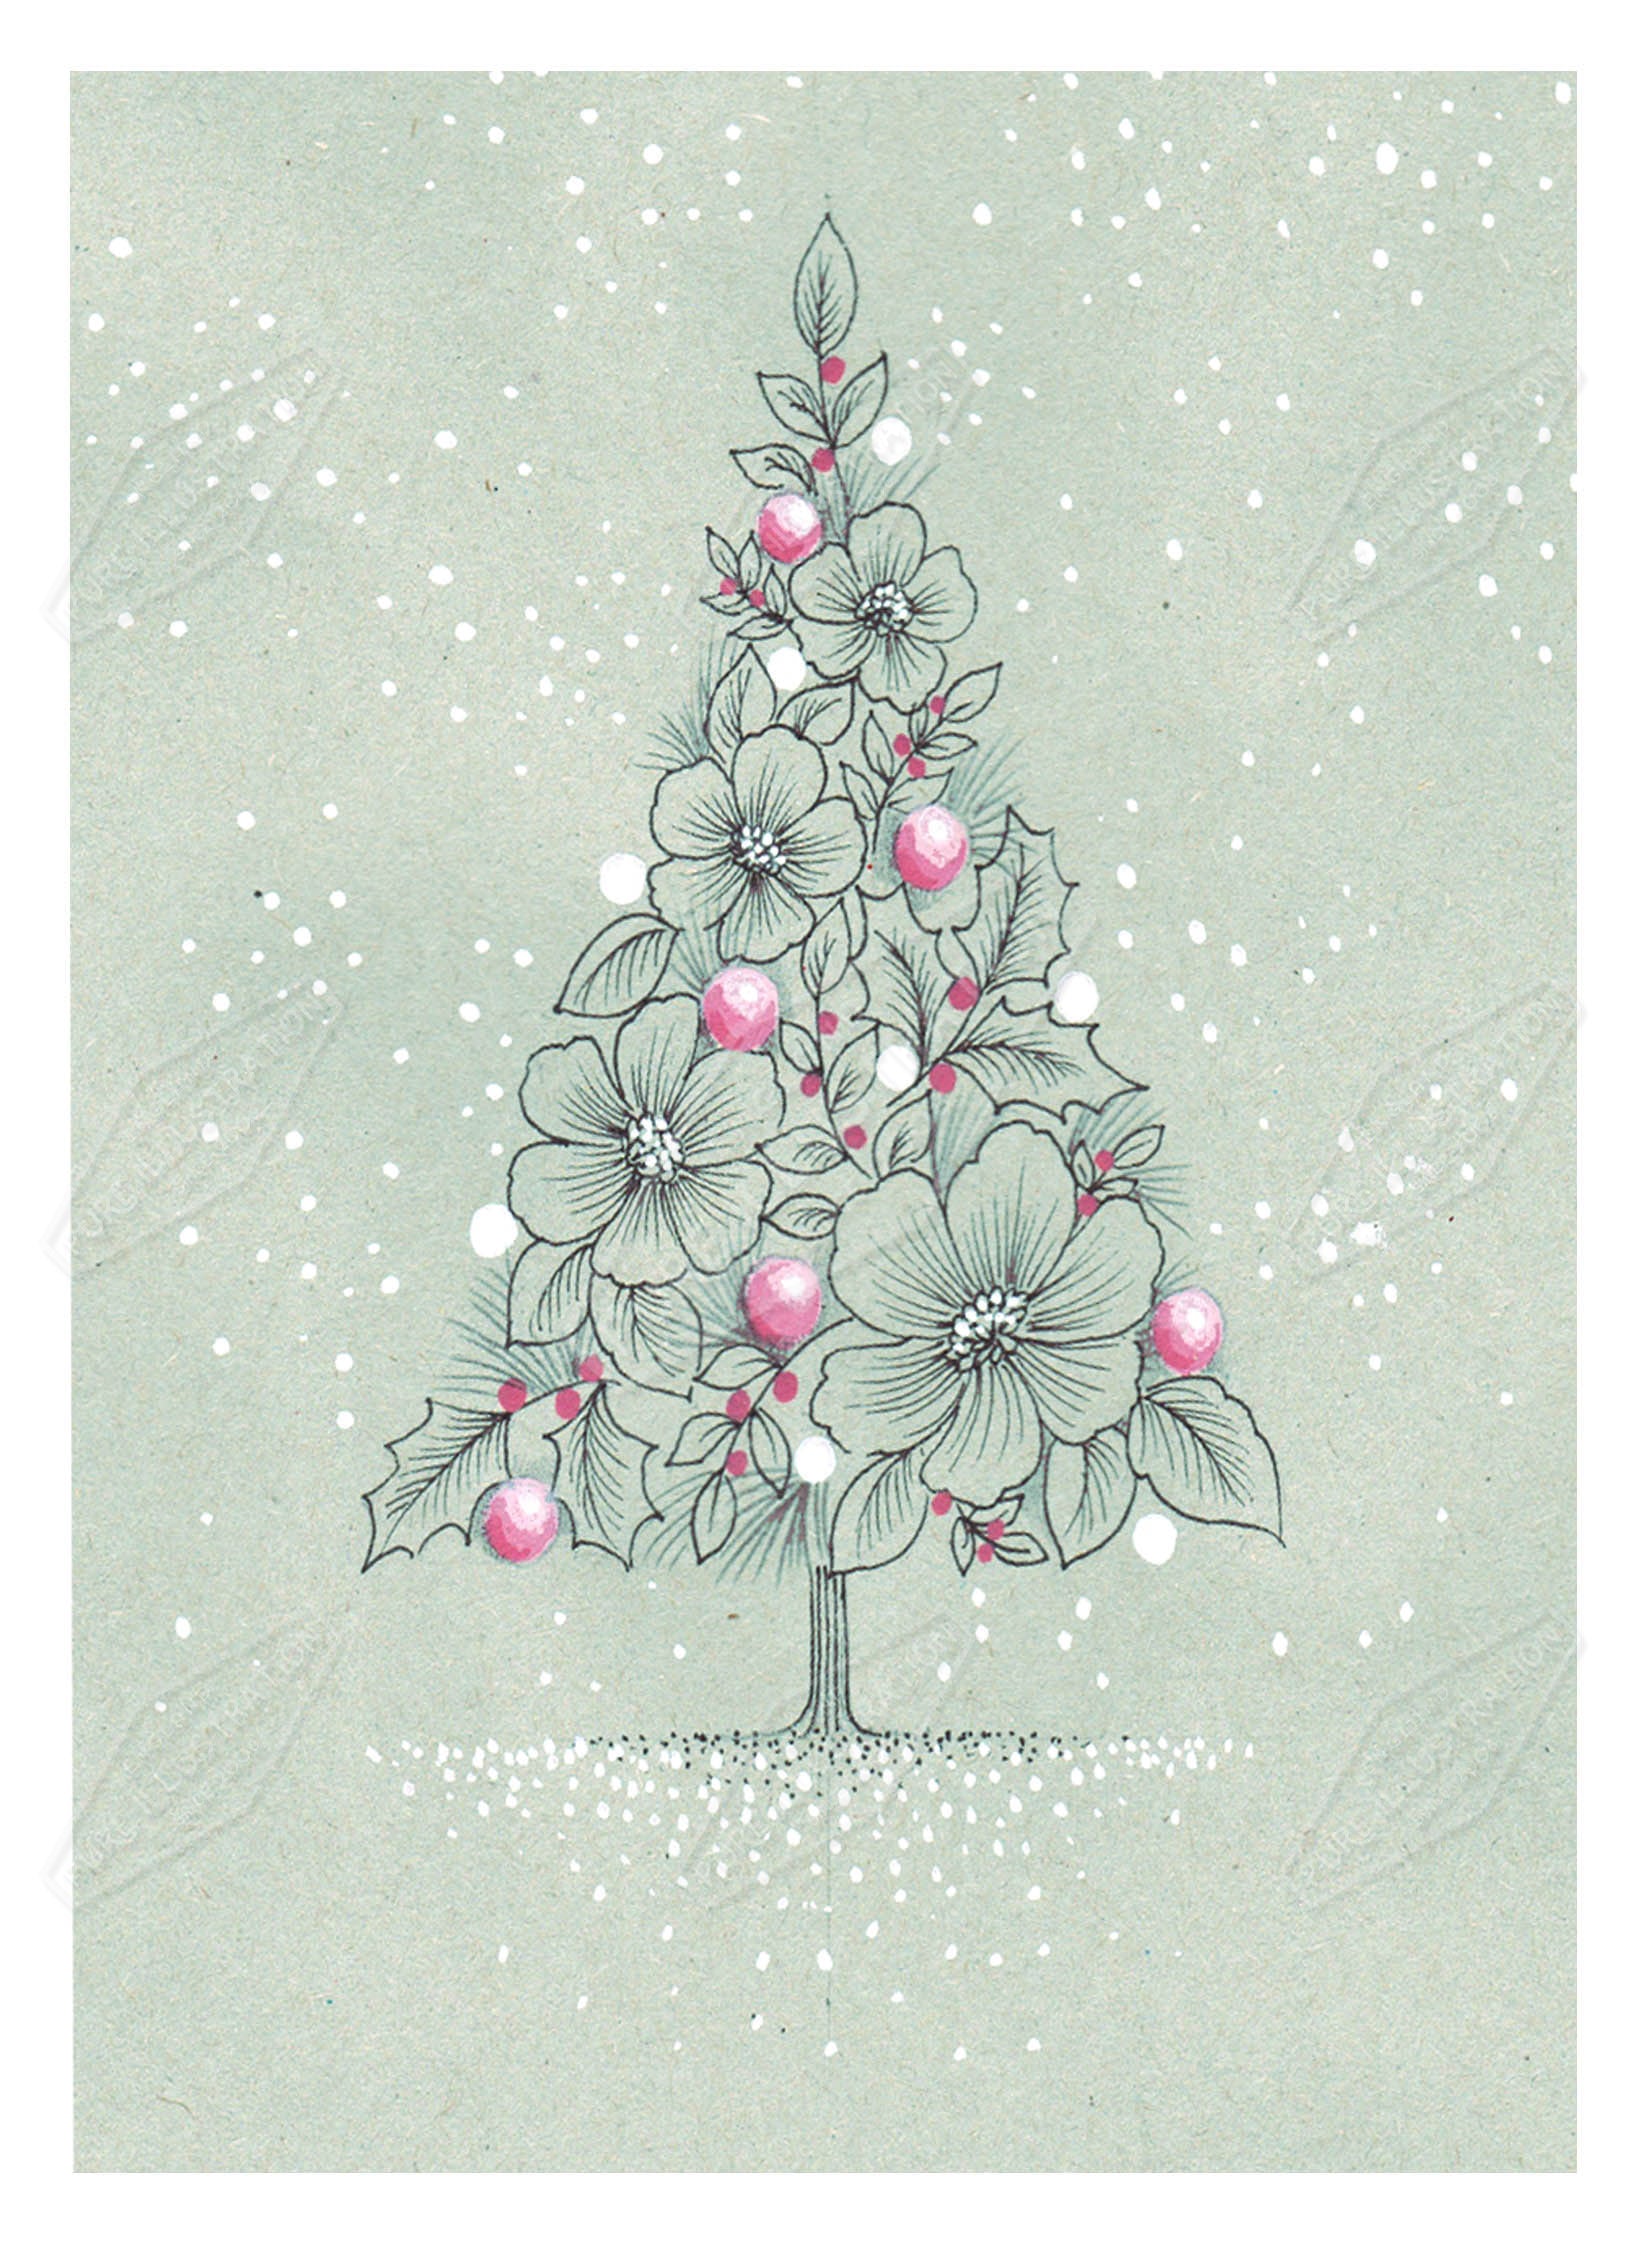 00035719AMA - Ally Marie is represented by Pure Art Licensing Agency - Christmas Greeting Card Design